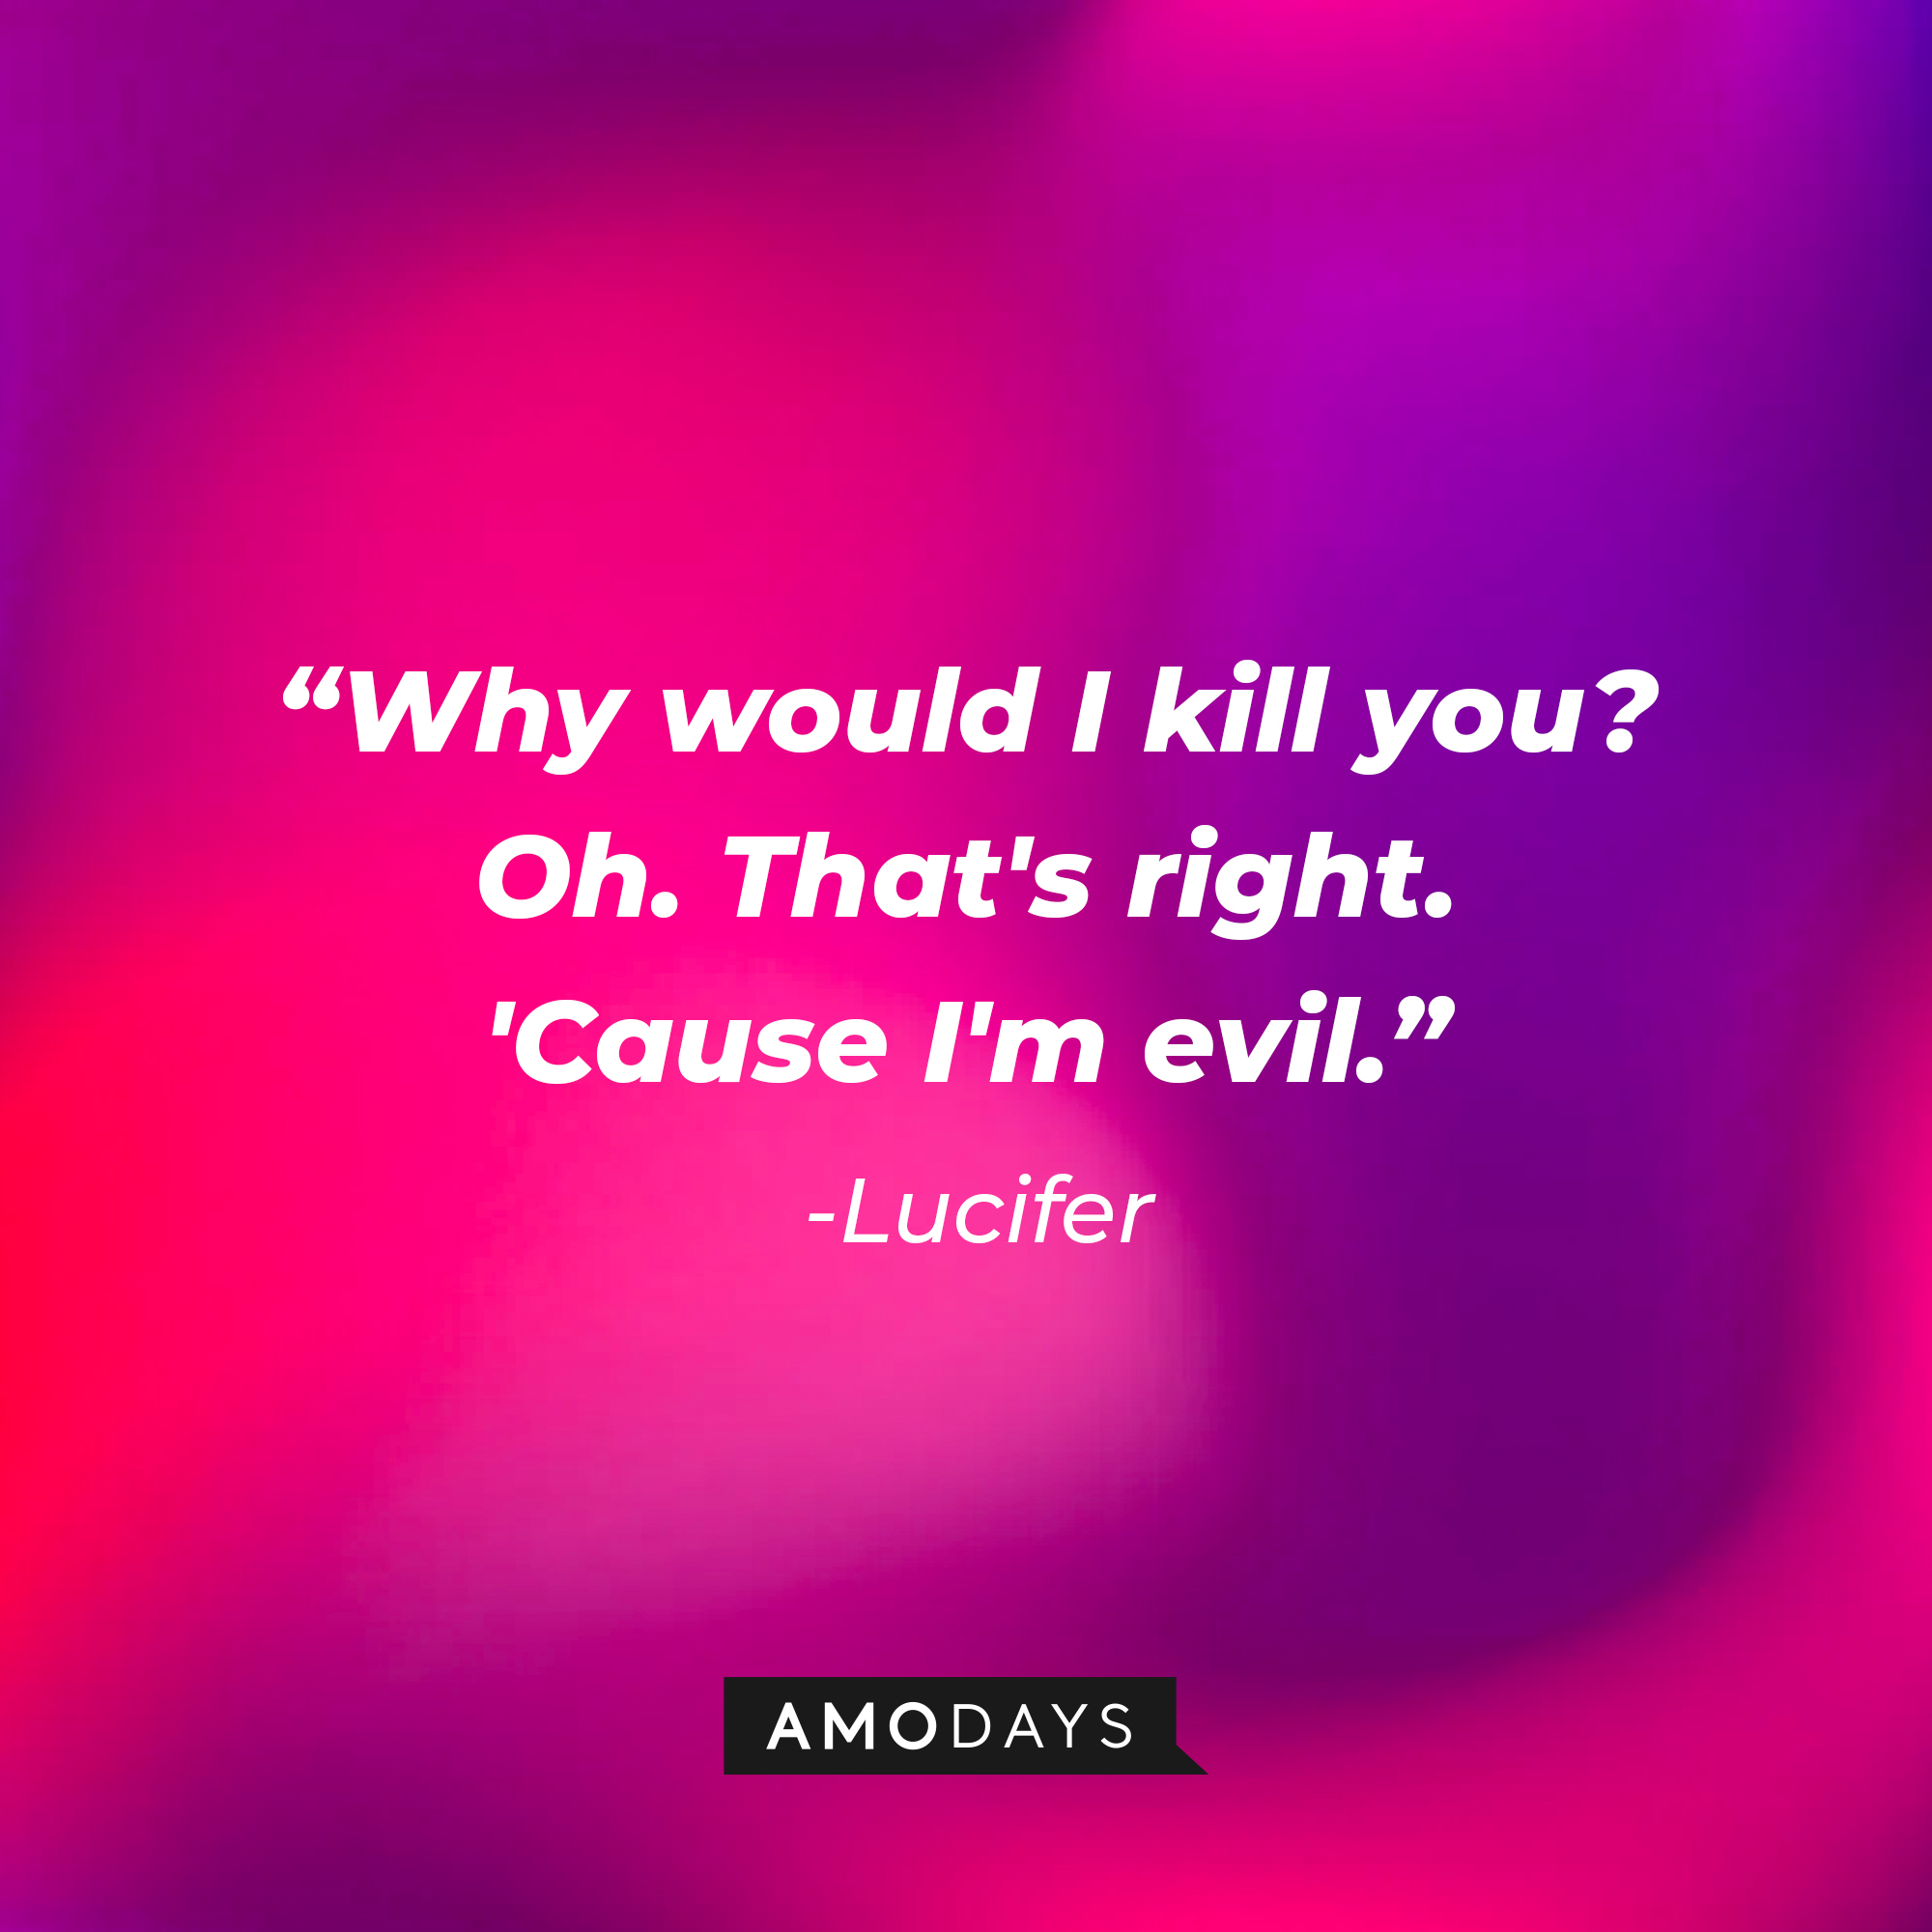 Lucifer’s quote: "Why would I kill you? Oh. That's right. 'Cause I'm evil." | Source: AmoDays